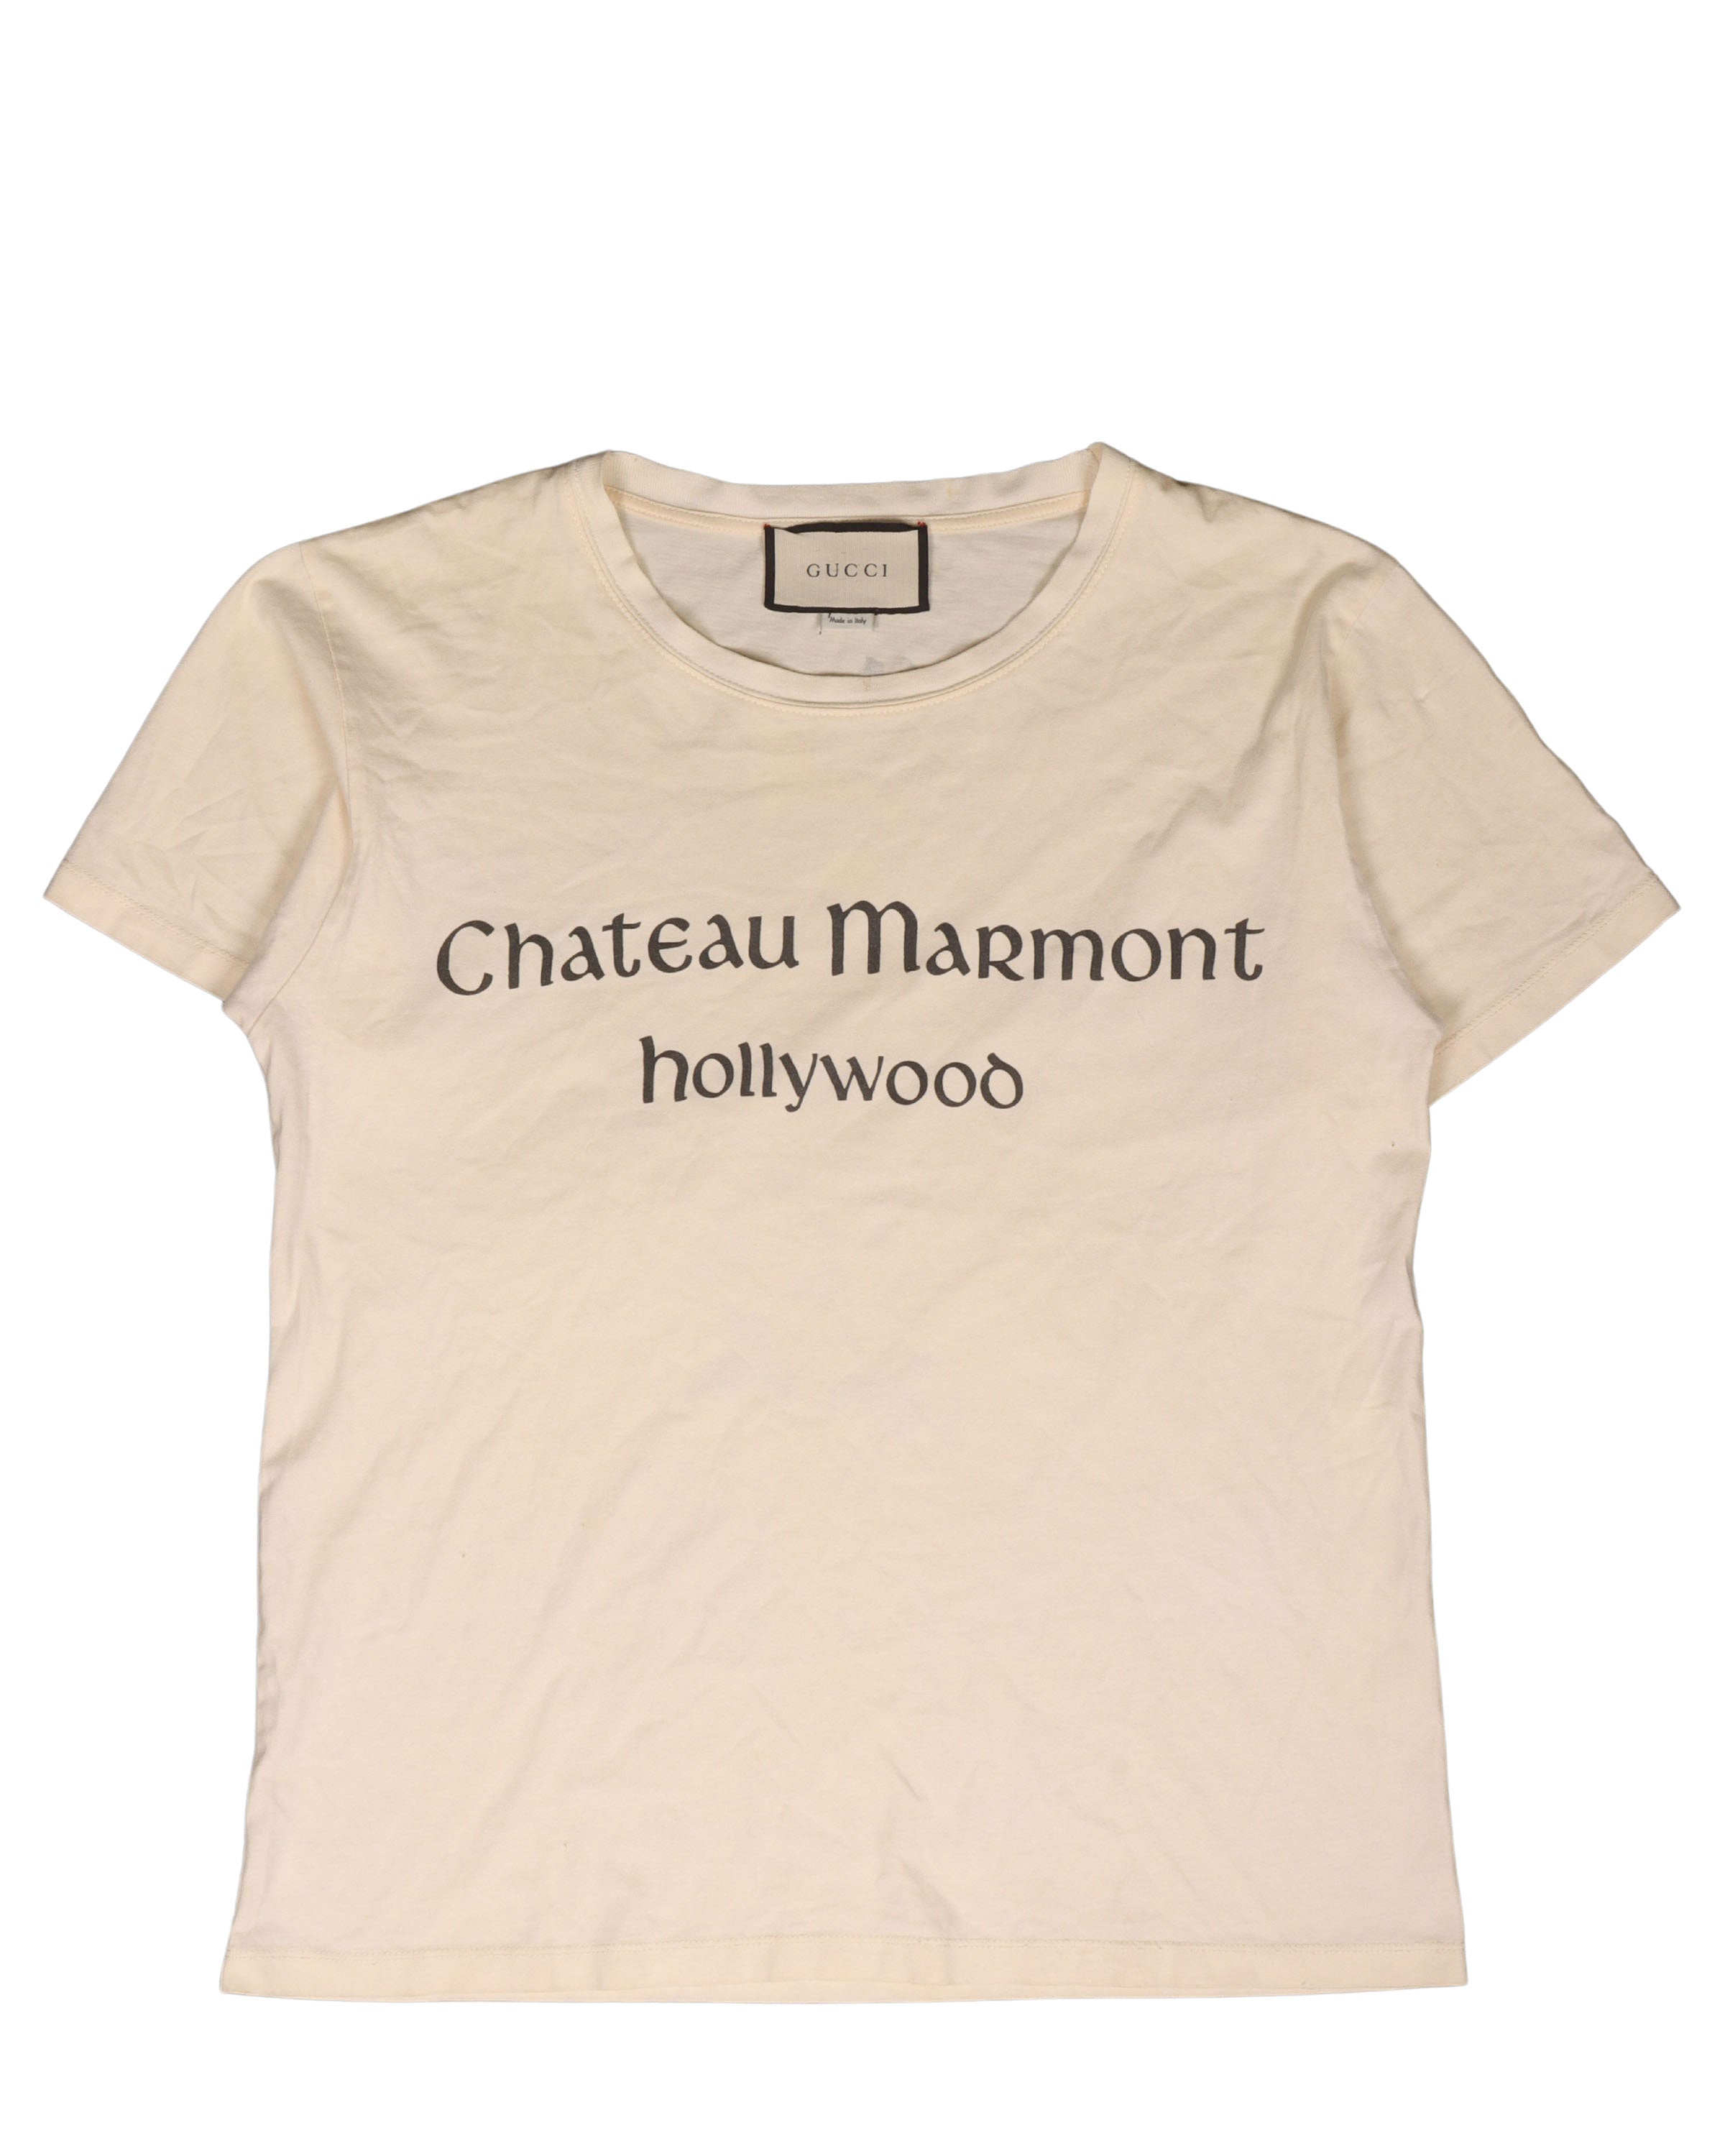 Gucci Chateau Marmont Hollywood T-Shirt